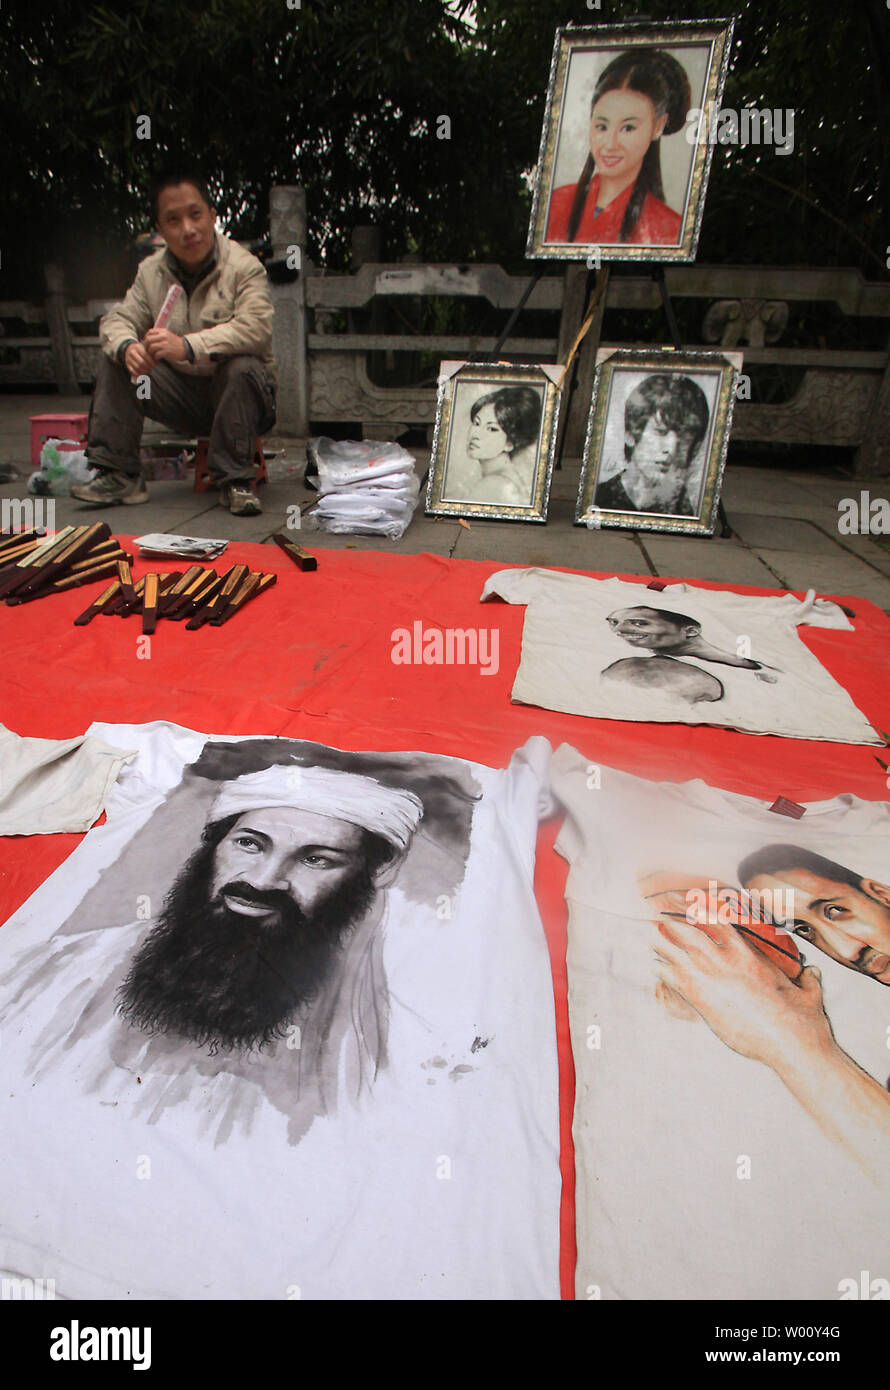 A Chinese artists displays examples of his work, including a charcoal portrait of recently killed al Qaeda leader Osama bin Laden in Beijing on October 5, 2011.  China officially criticized U.S. Barack Obama's administration for the military operation that led to the killing of bin Laden.       UPI/Stephen Shaver Stock Photo